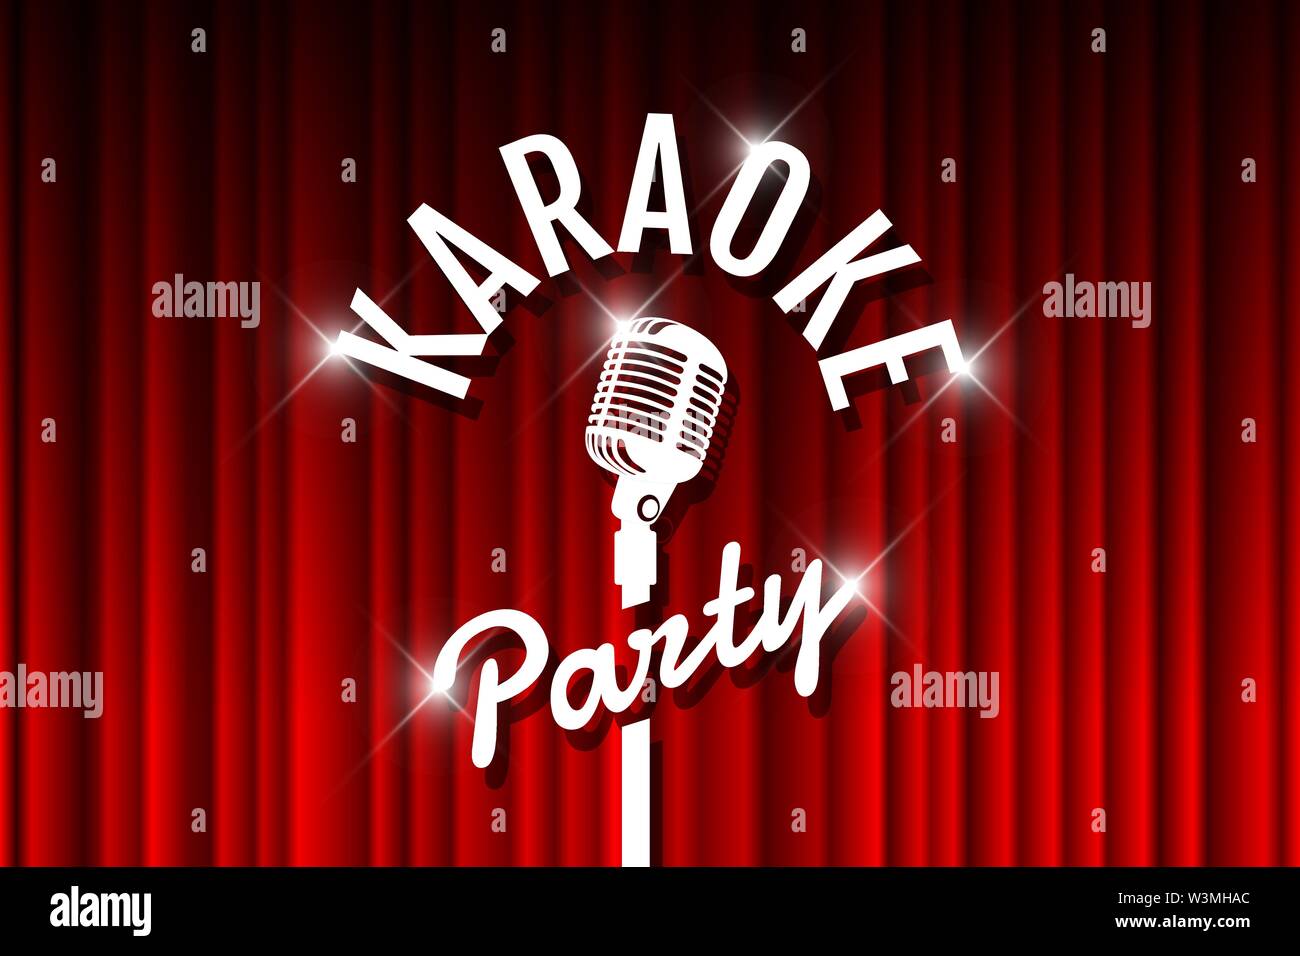 Karaoke party night live show open mic on empty theatre stage. Vintage microphone against red curtain drape backdrop. Retro vector art stage image illustration Stock Vector